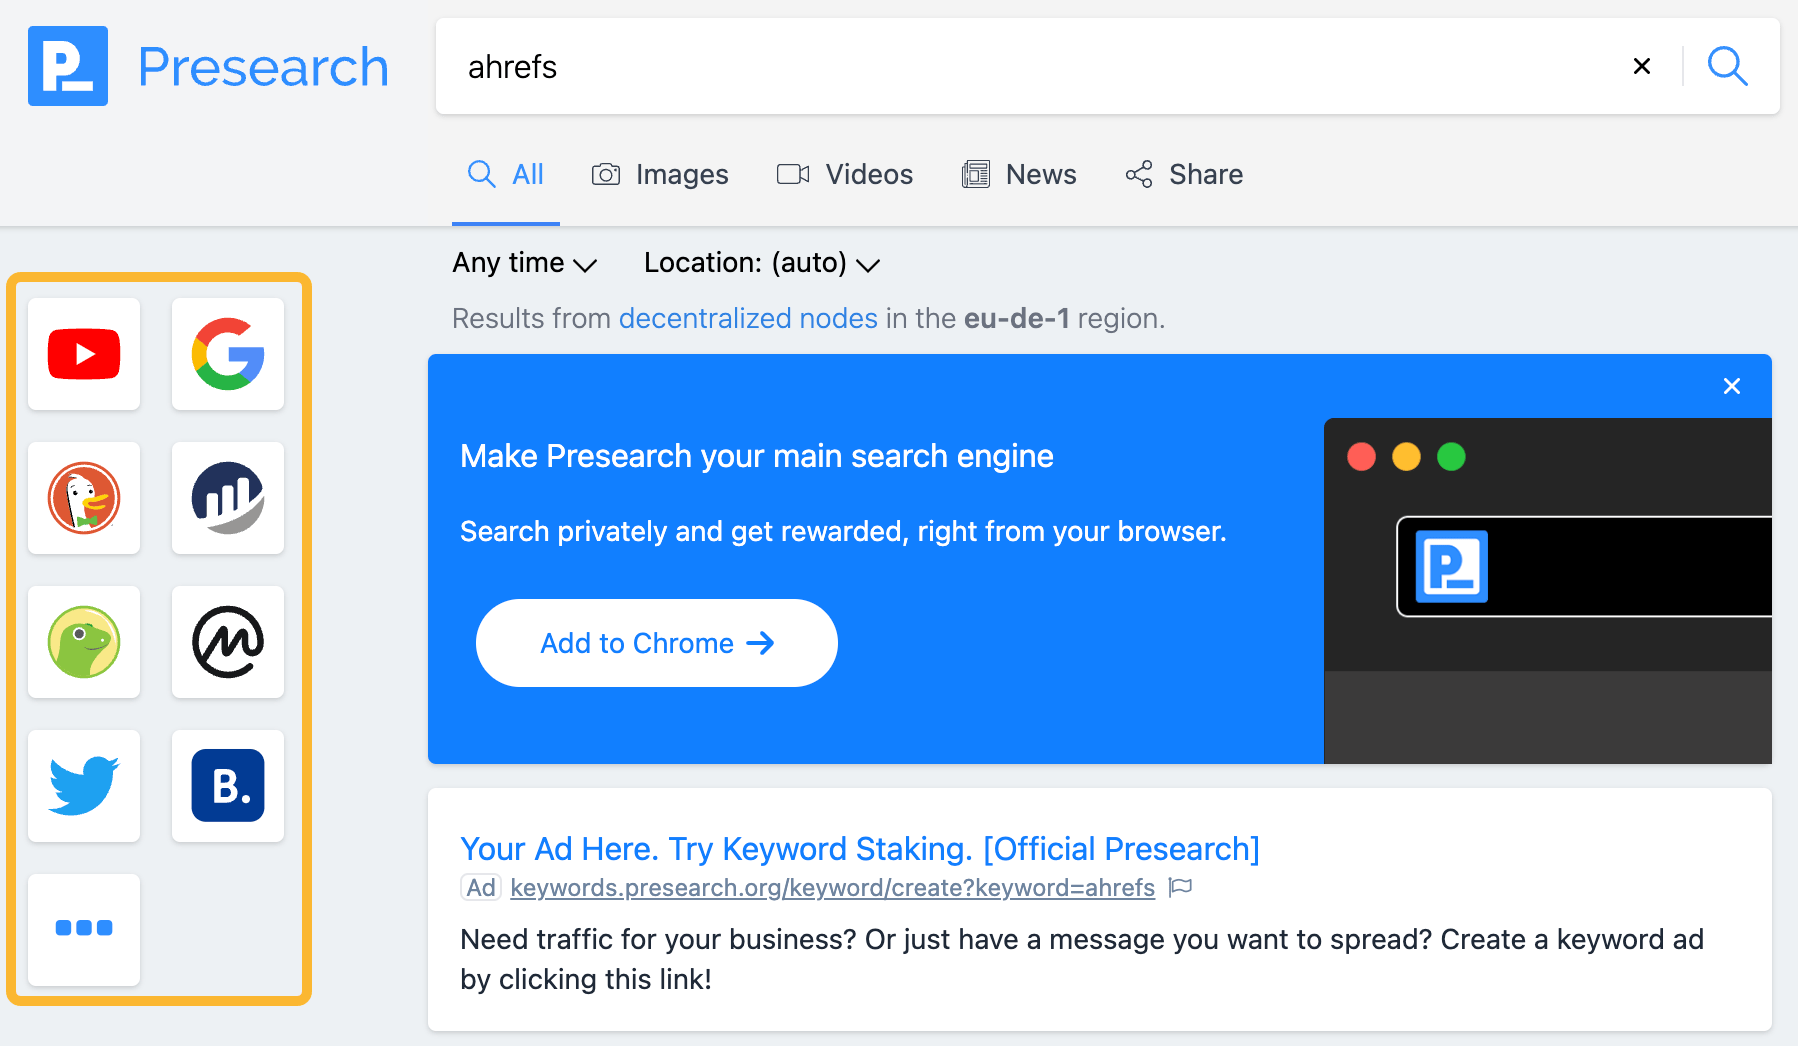 Presearch offering search shortcuts
